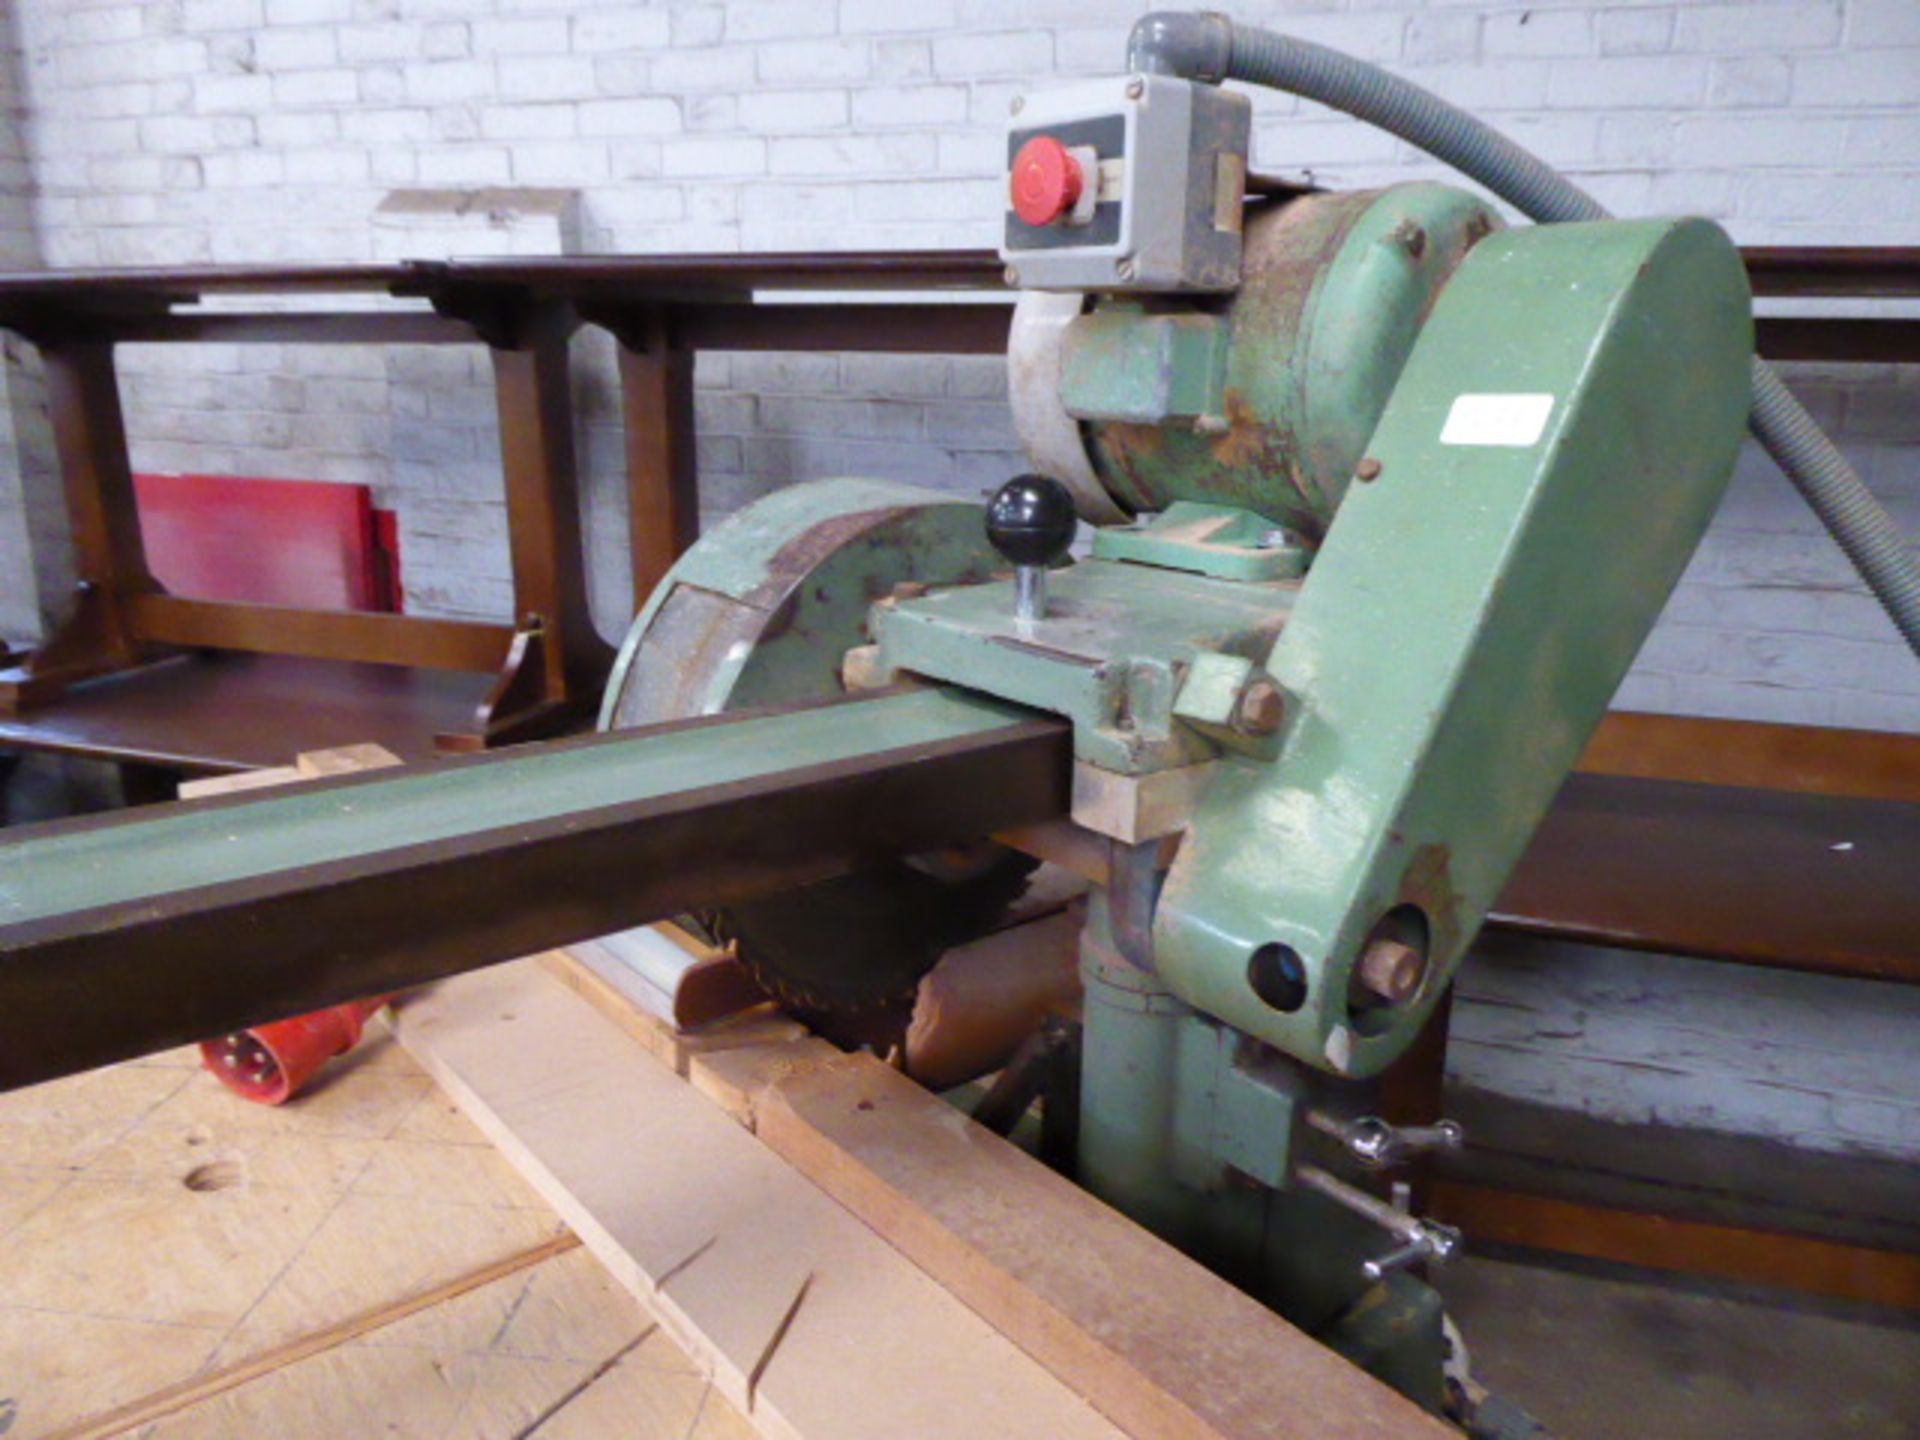 Dominion cross cut radial arm saw, 3 phase - Image 2 of 4